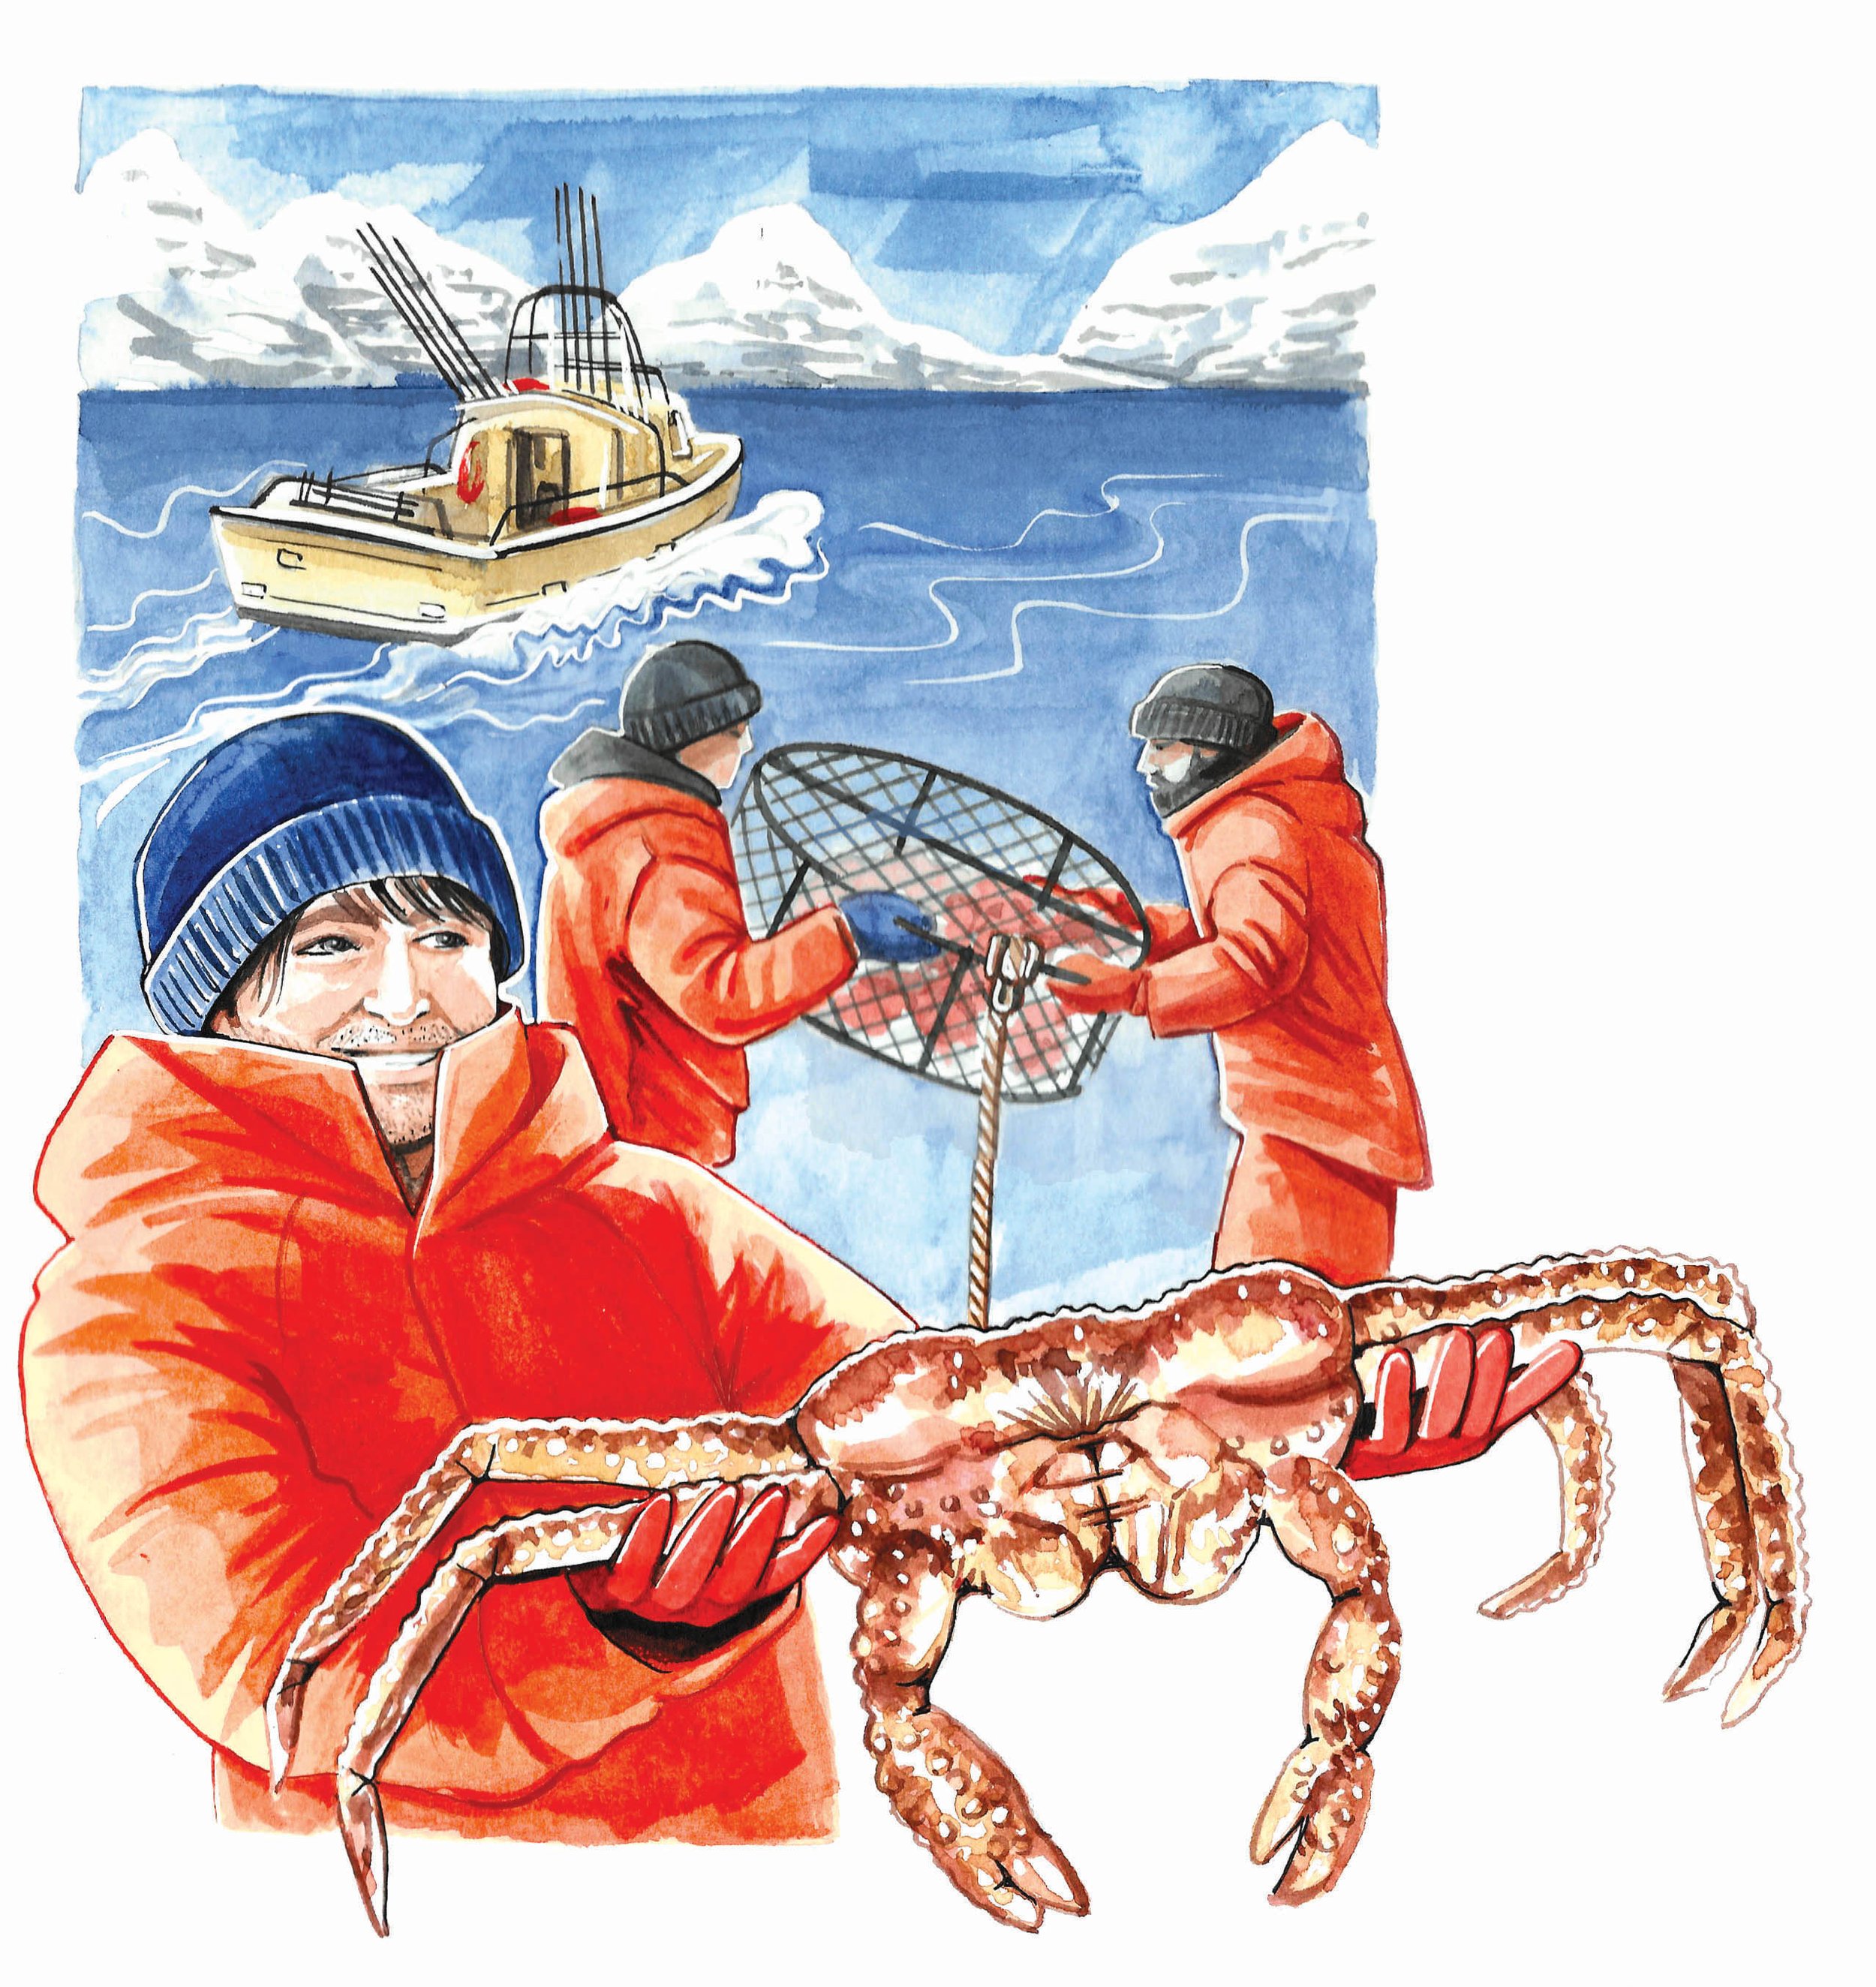  Simon Reeve fishing for King Crab in Norway 